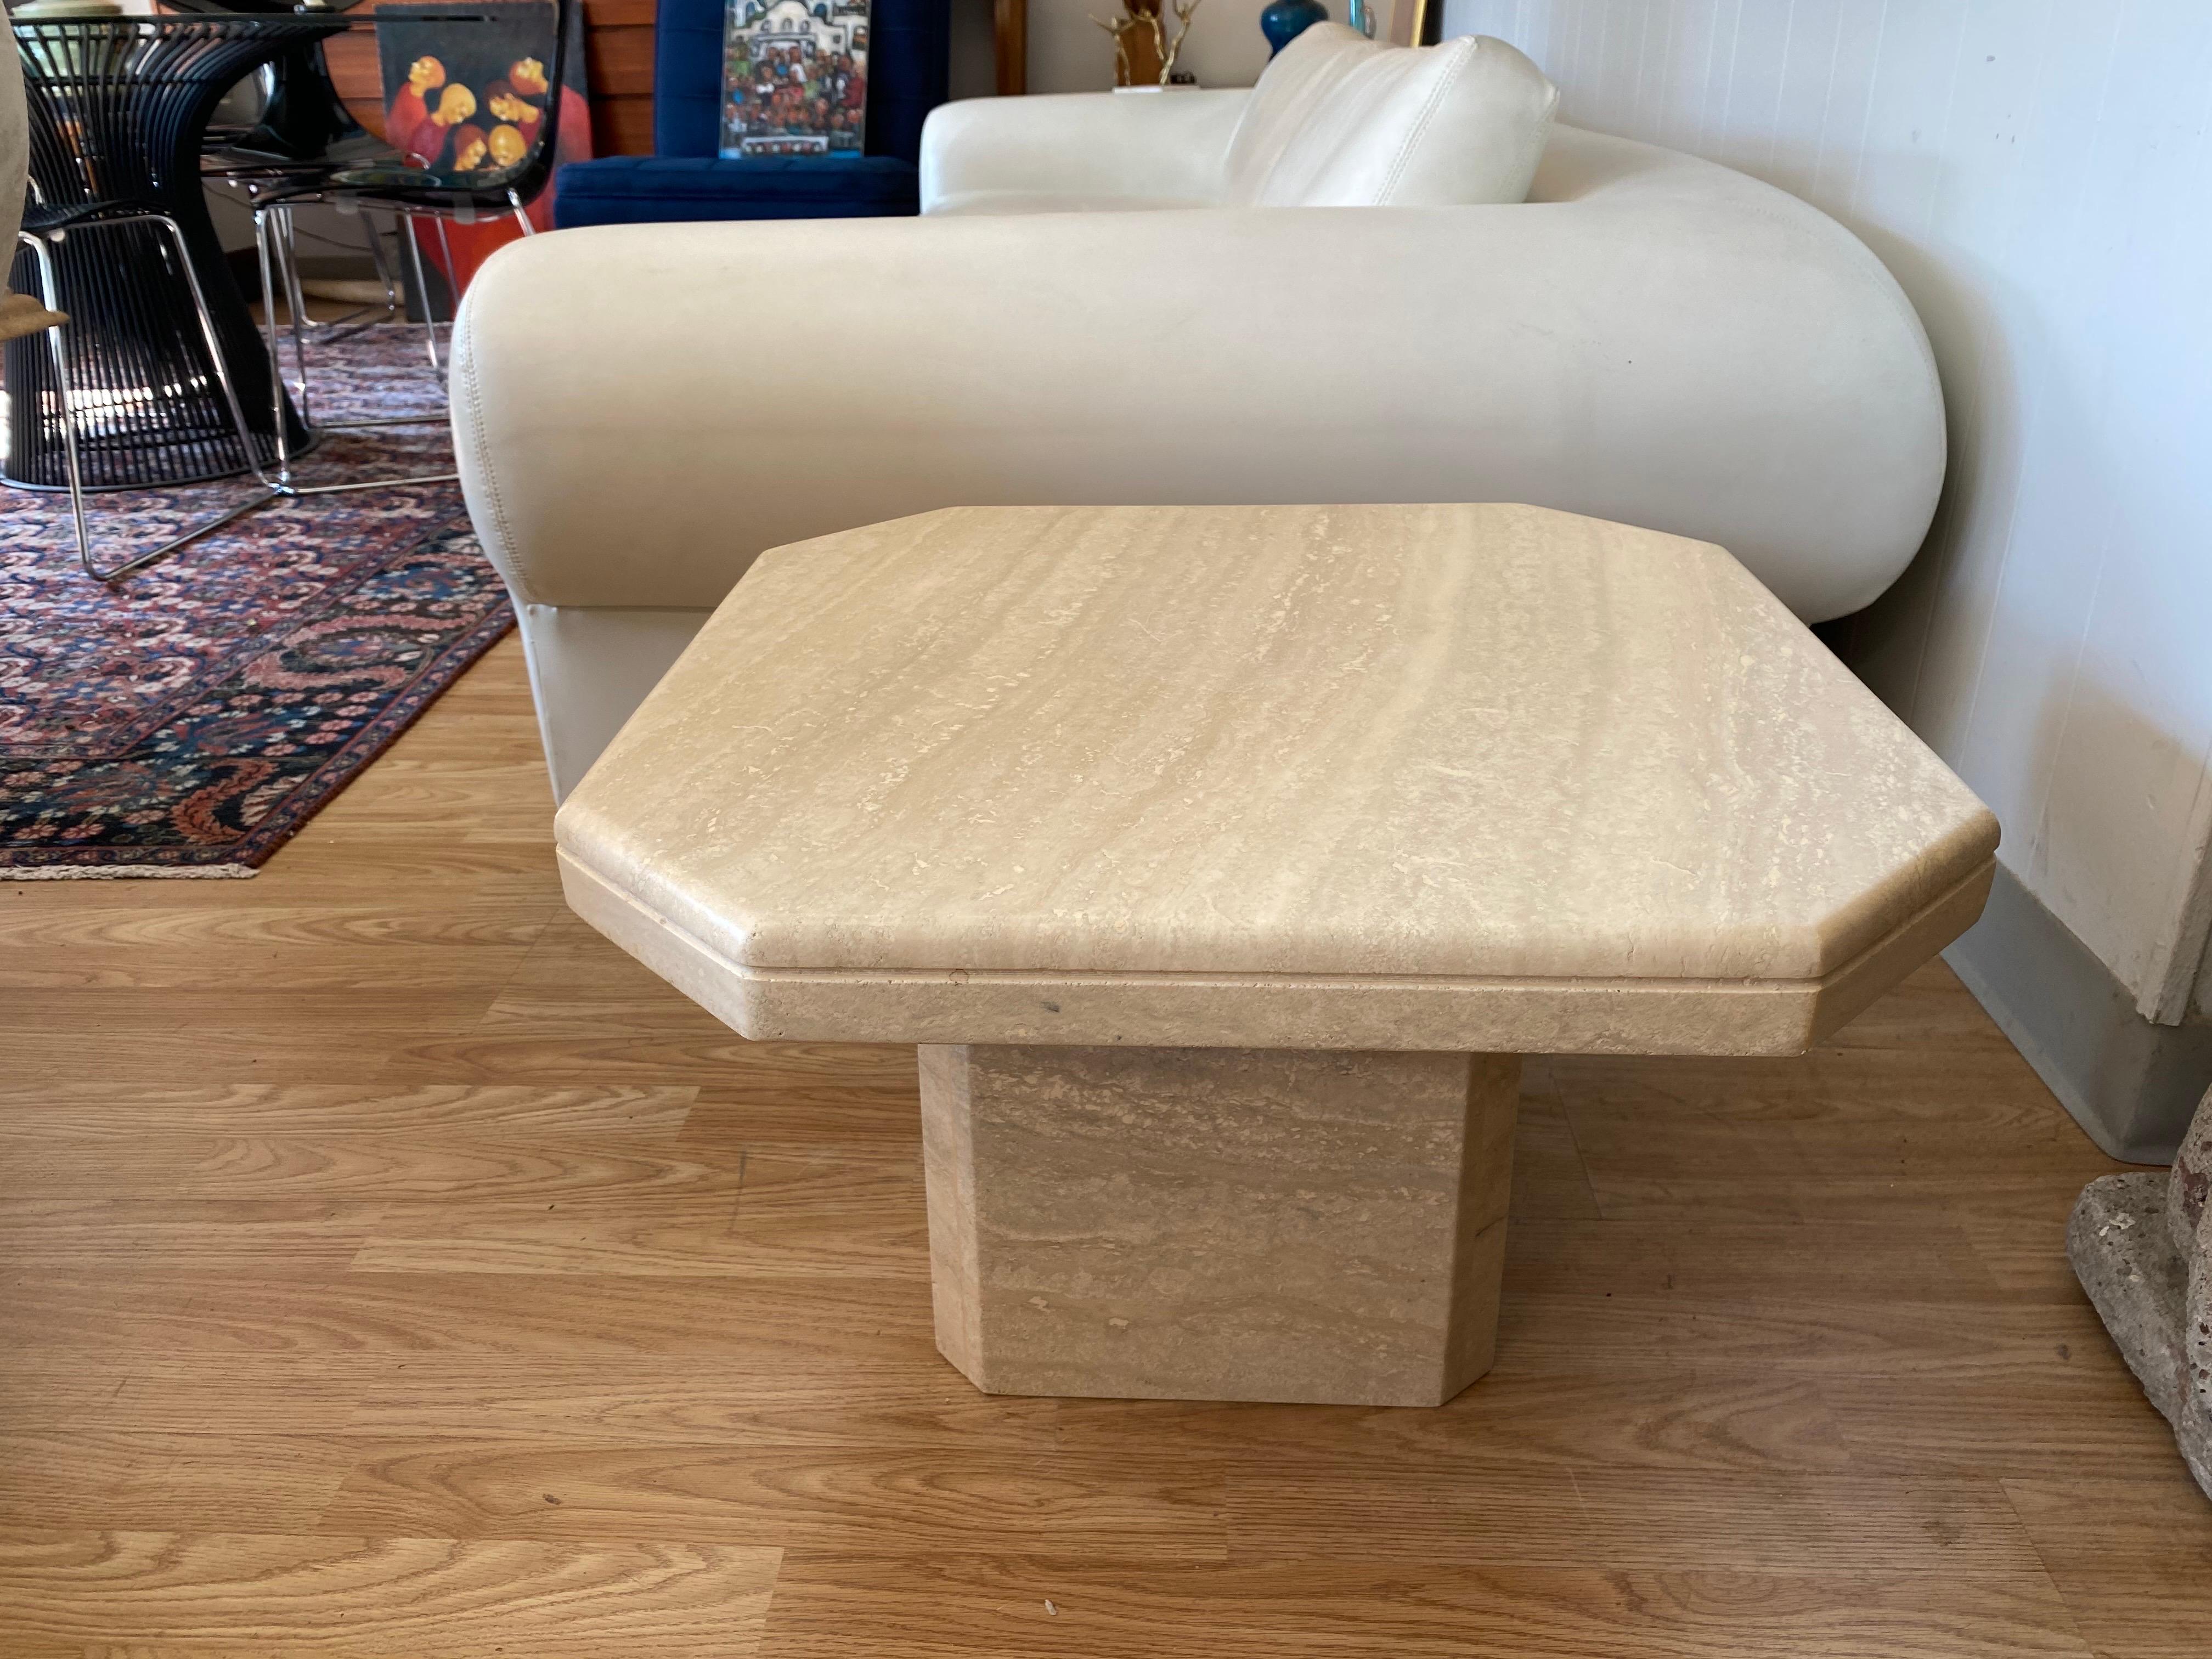 Late 20th Century Vintage Italian Travertine Side Table with Pedestal Base